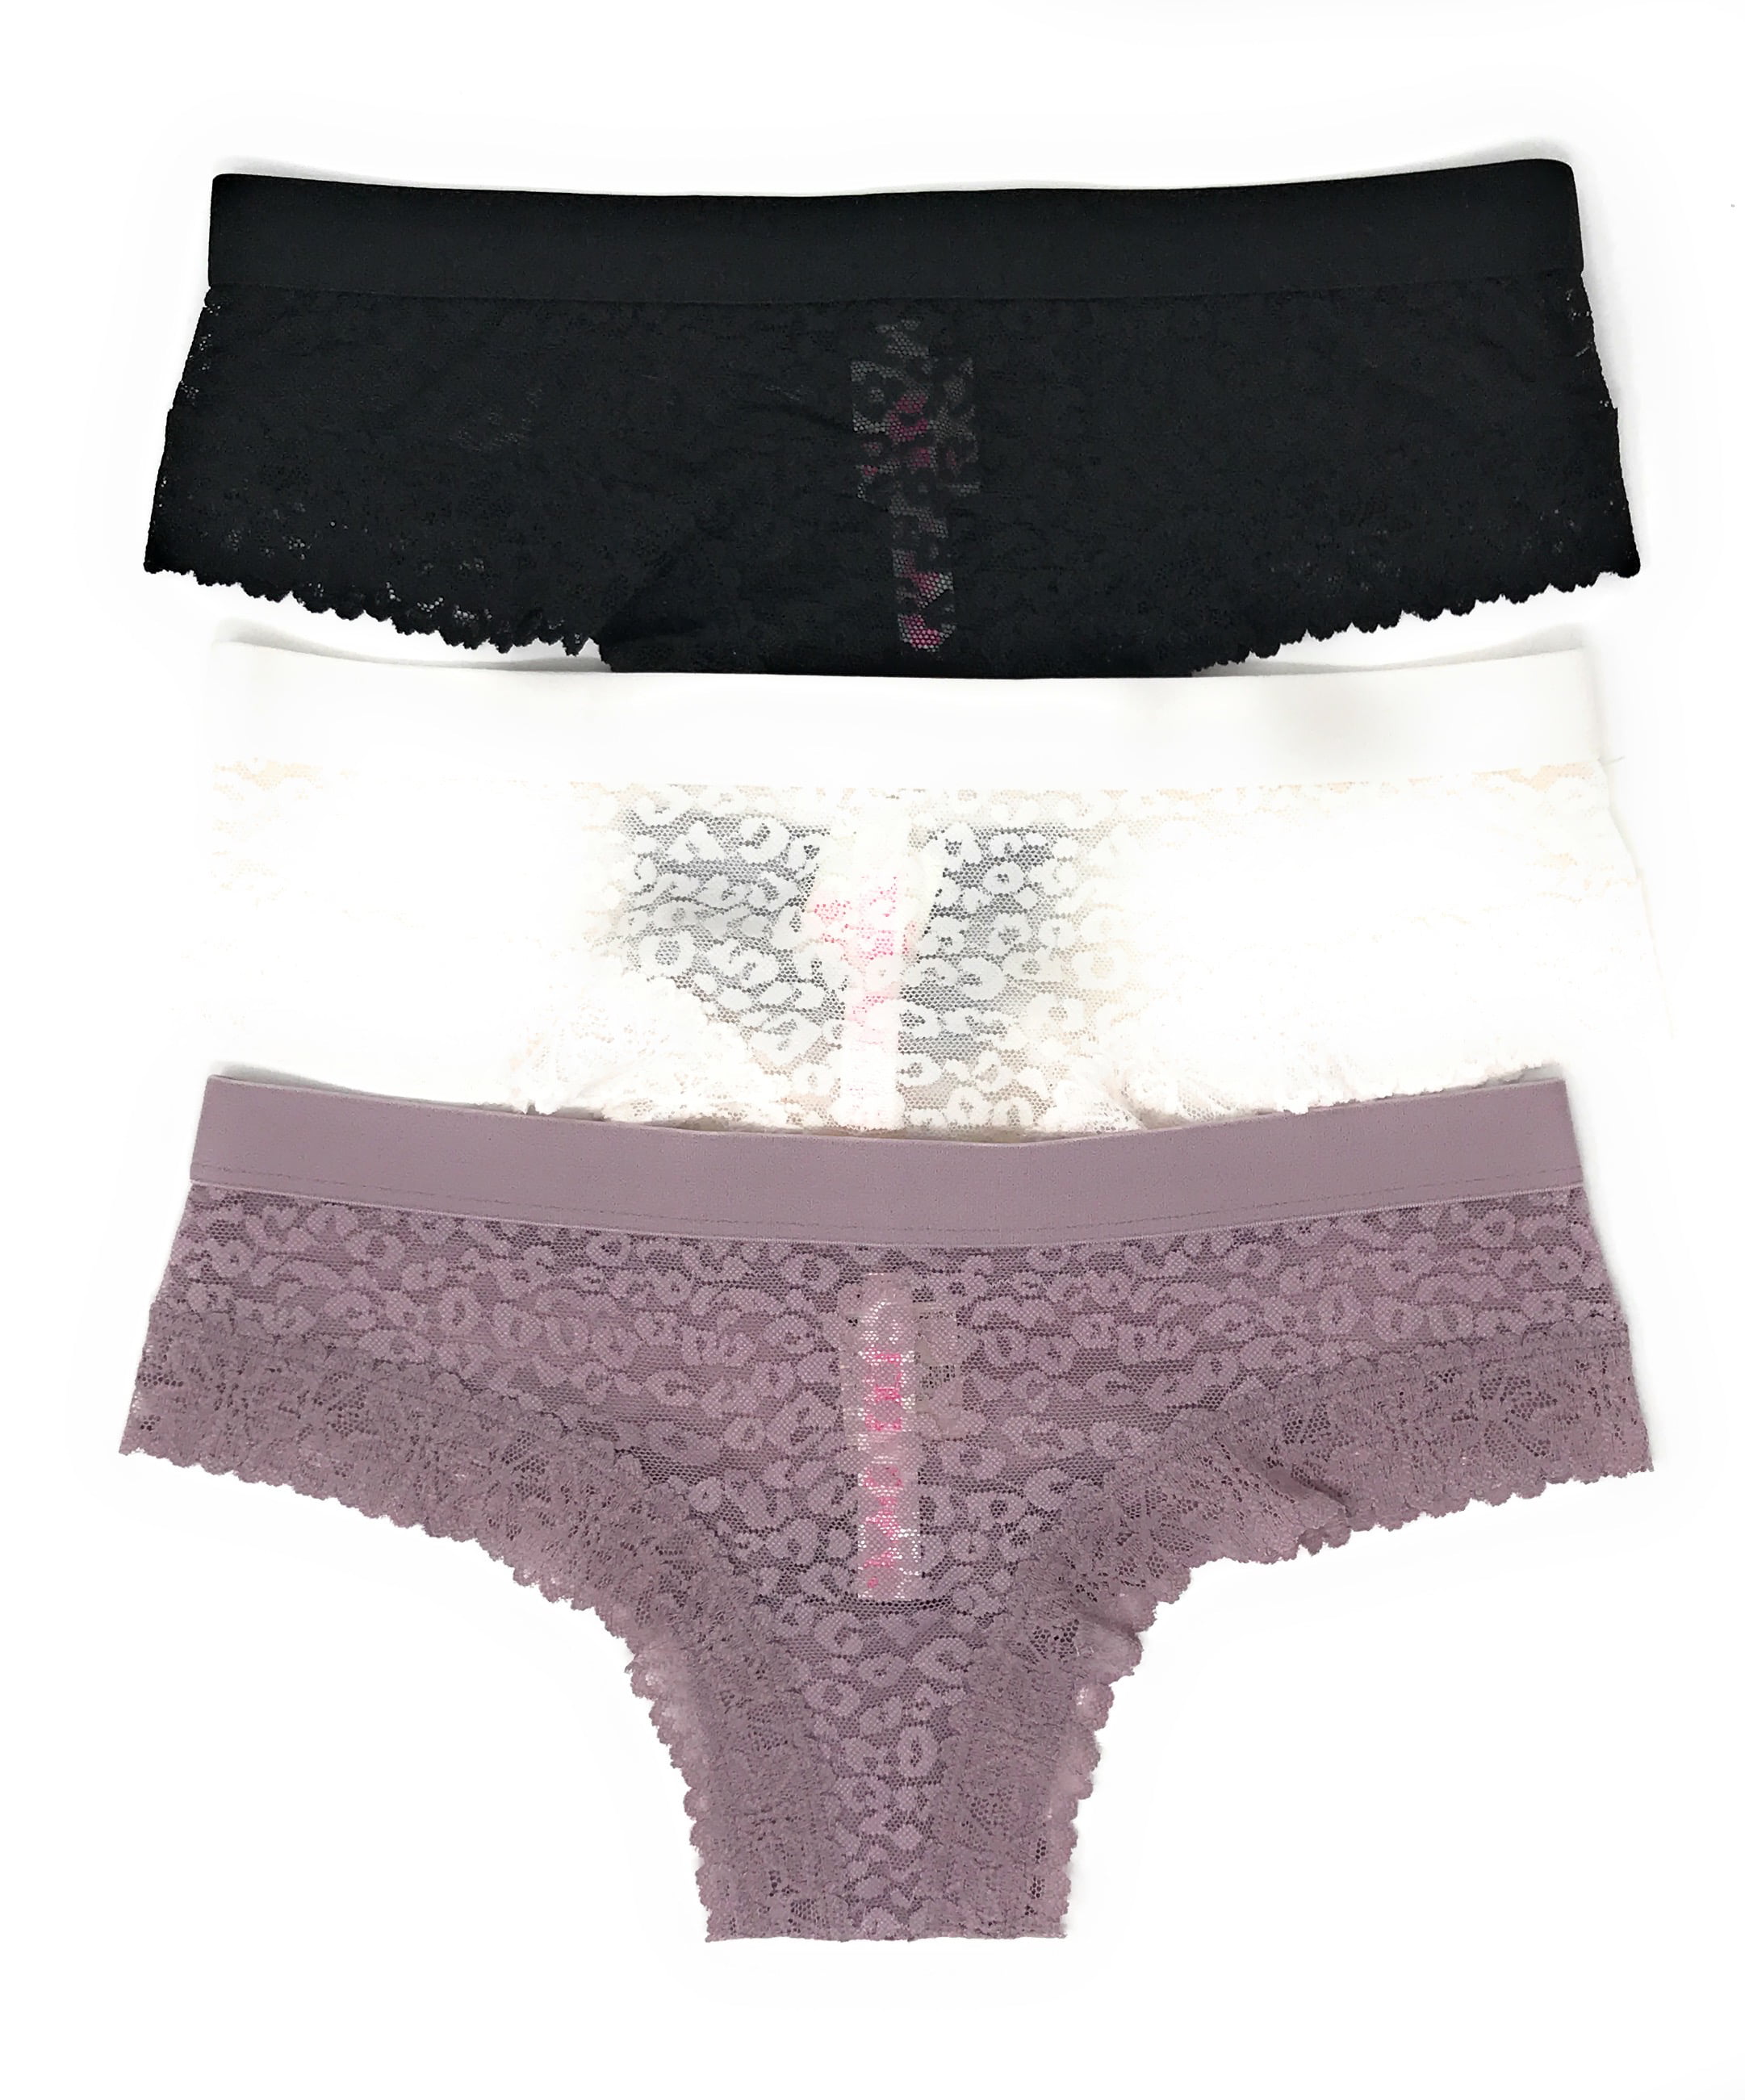 Victoria's Secret PINK - Grab your witches! 󾆮 7/$27.50 panties